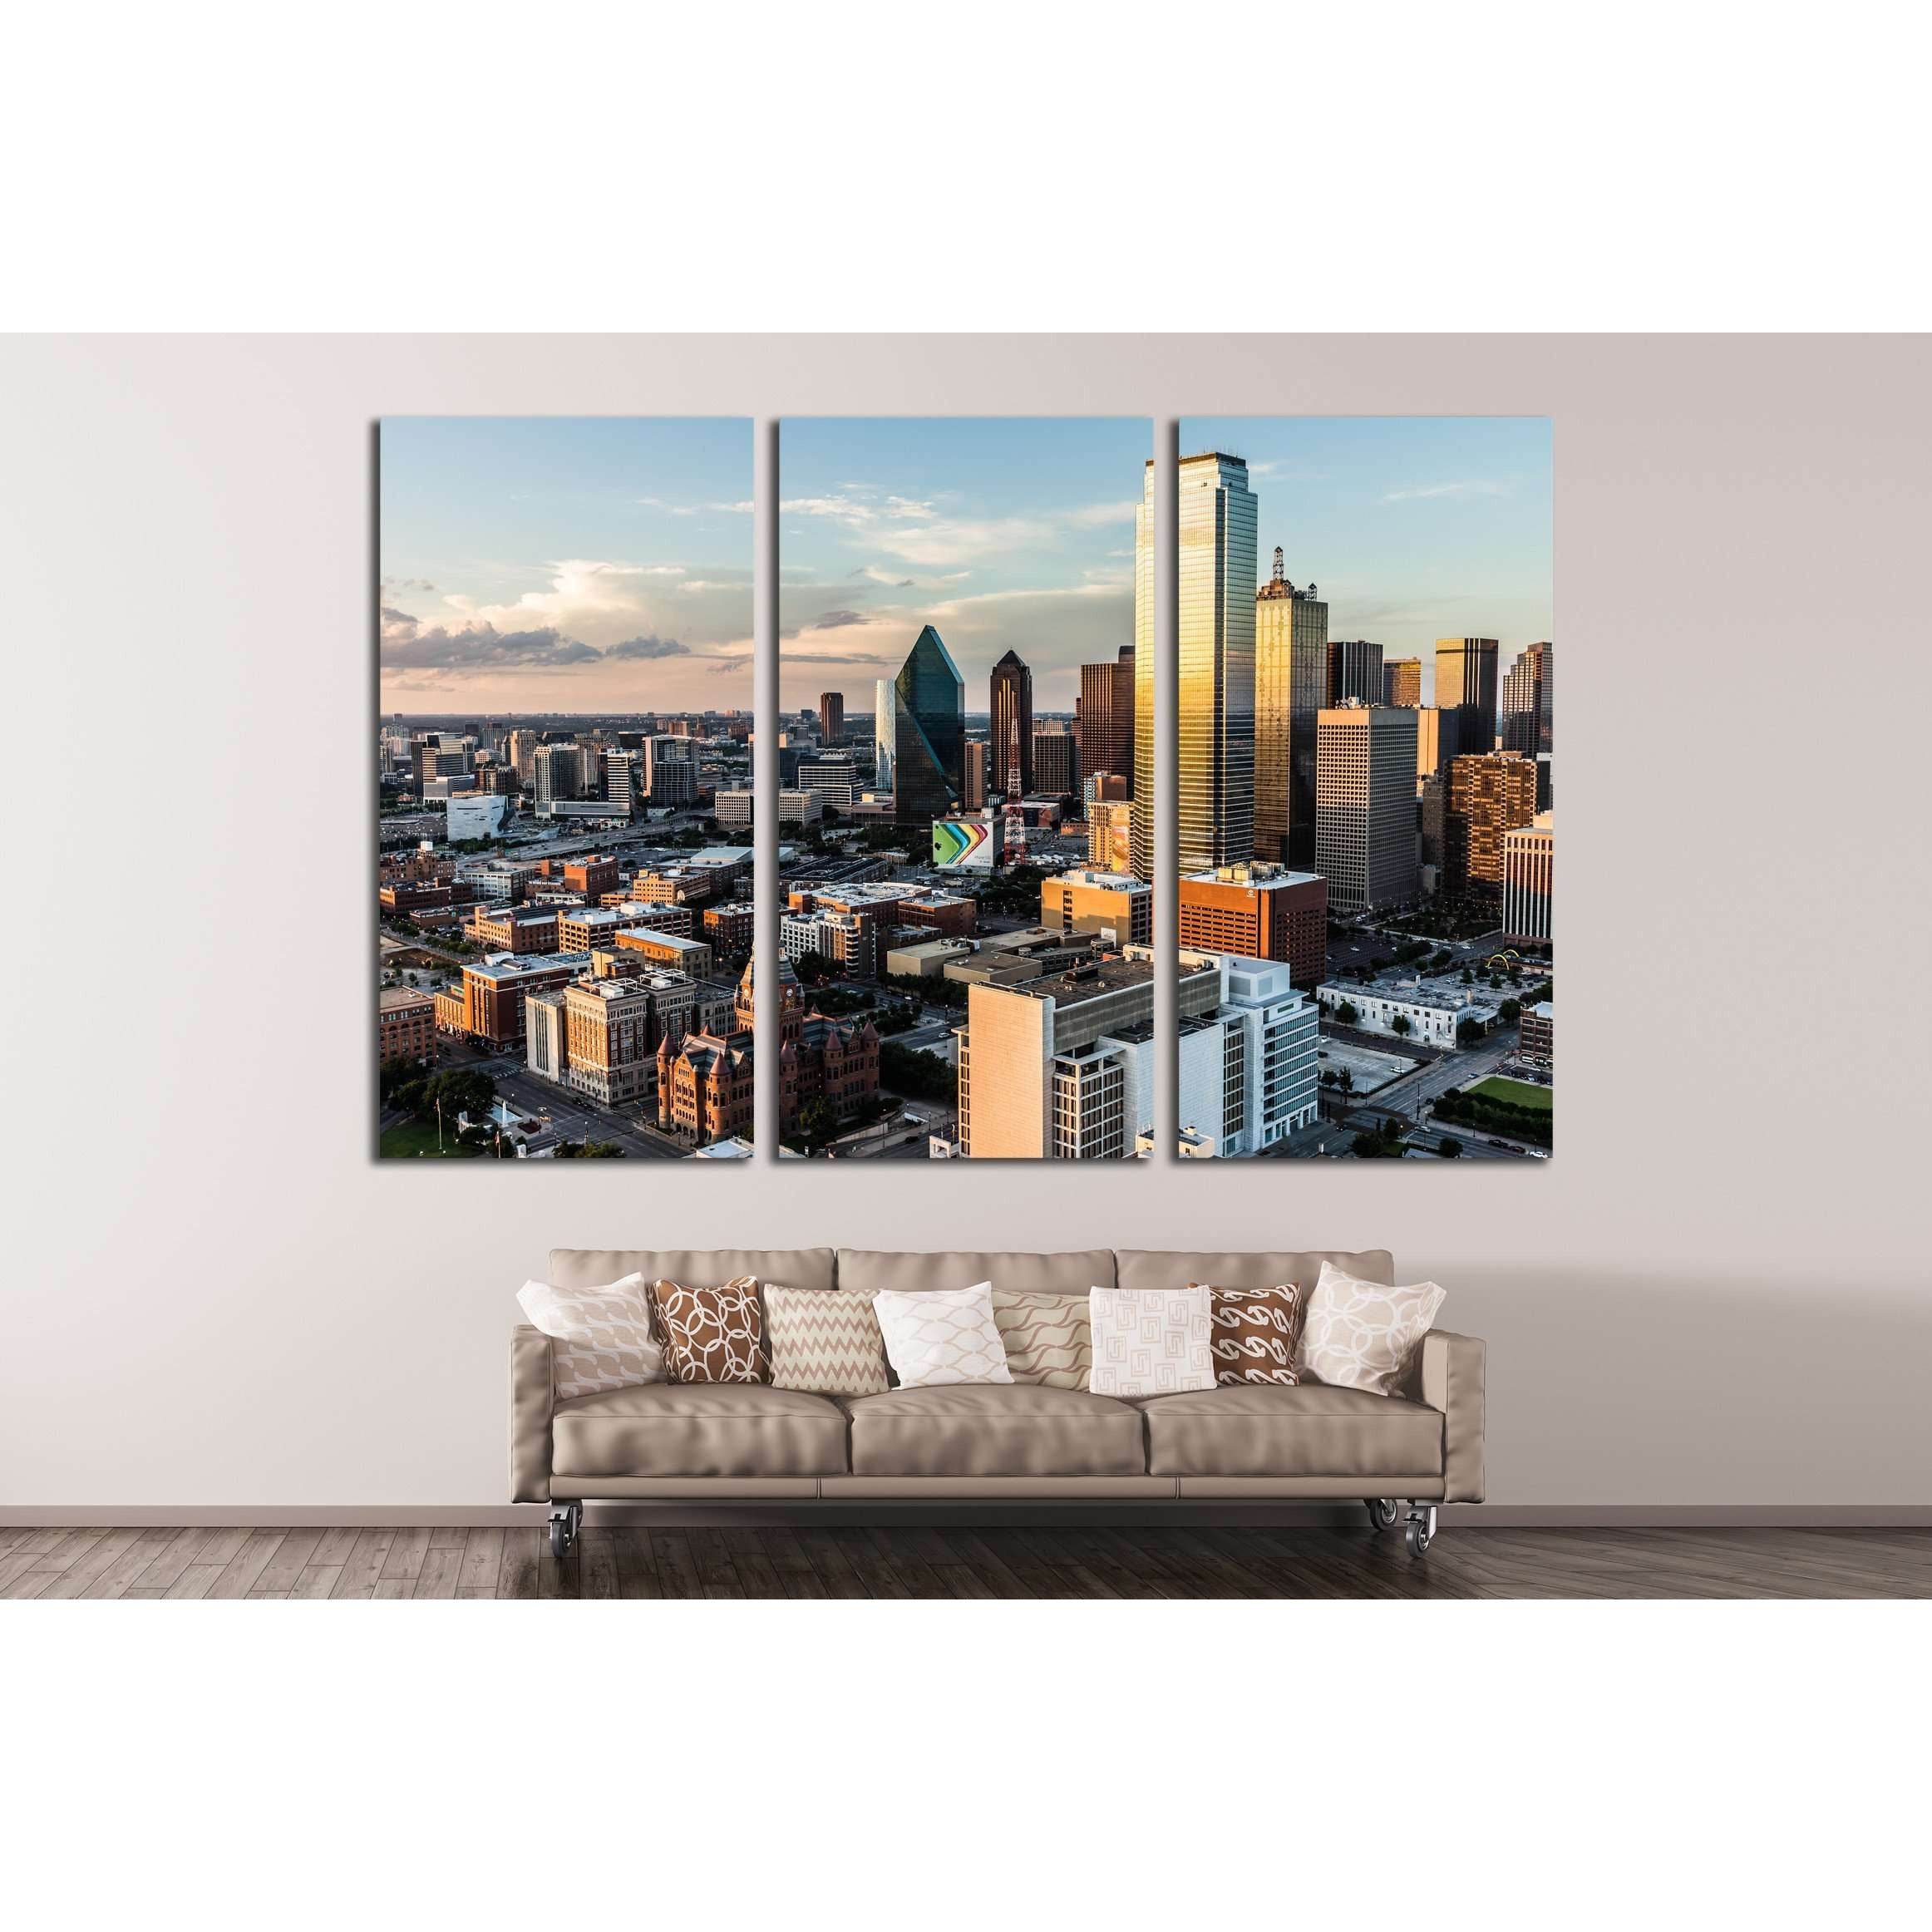 Clouds float across the sky in the setting sun of downtown Dallas, DALLAS, CIRCA №2208 Ready to Hang Canvas Print